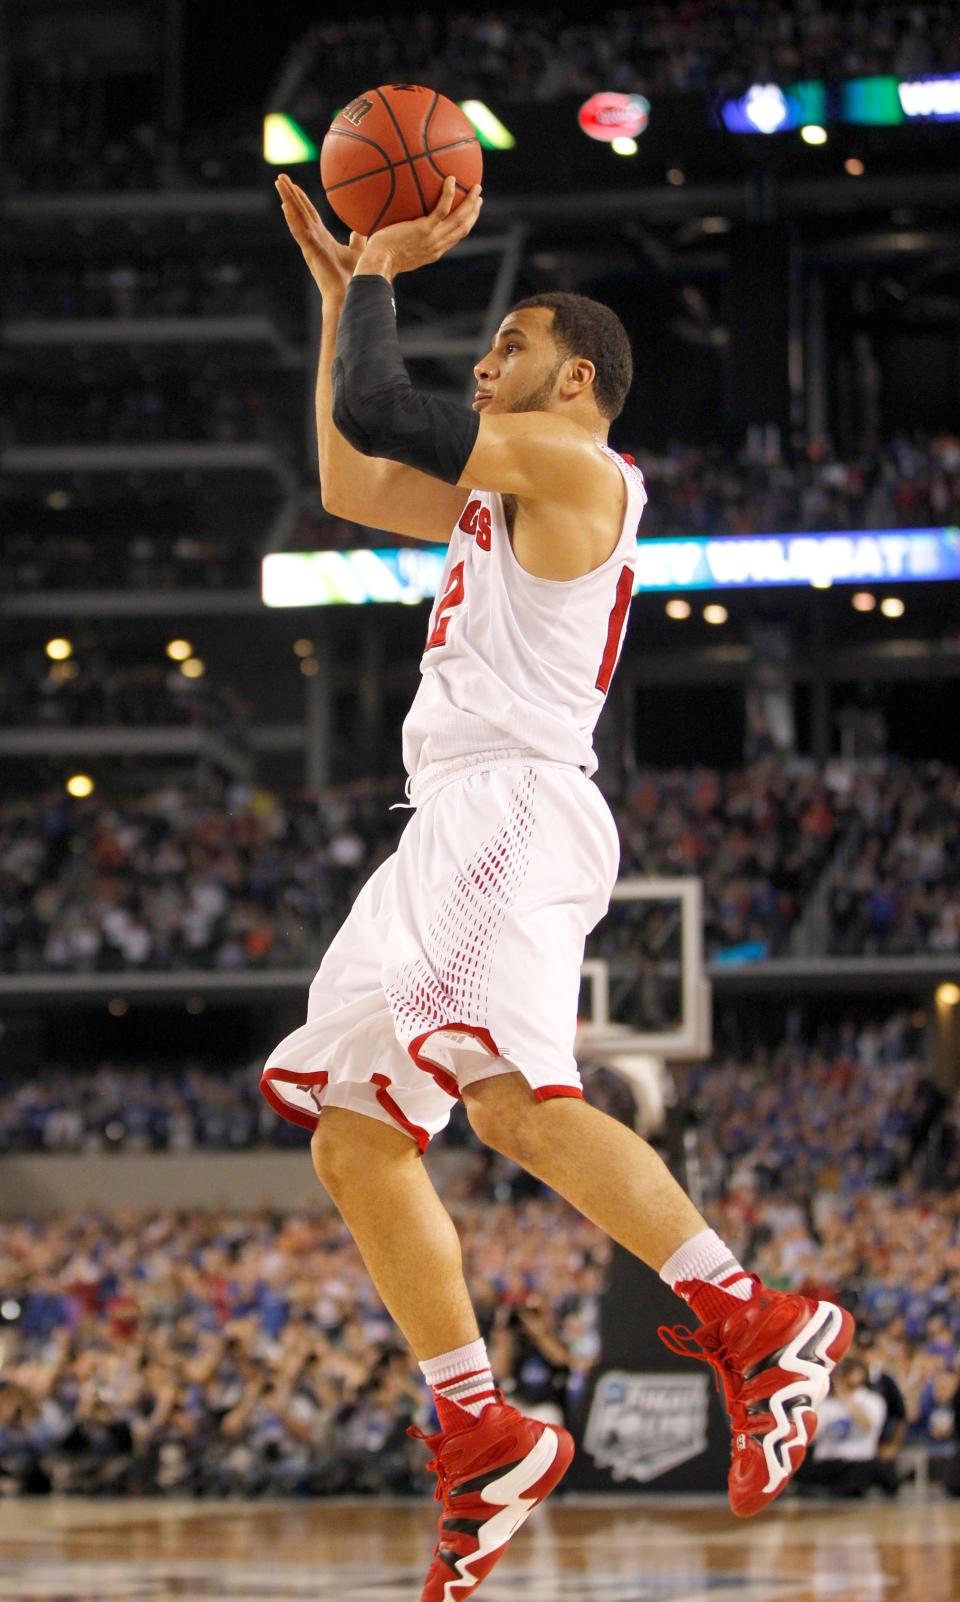 Wisconsin Badgers guard Traevon Jackson (12) attempts a shot that would win the game for Wisconsin at the NCAA Final Four Semifinals, Saturday, April 5, 2014, at AT&T Stadium in Arlington, Texas.